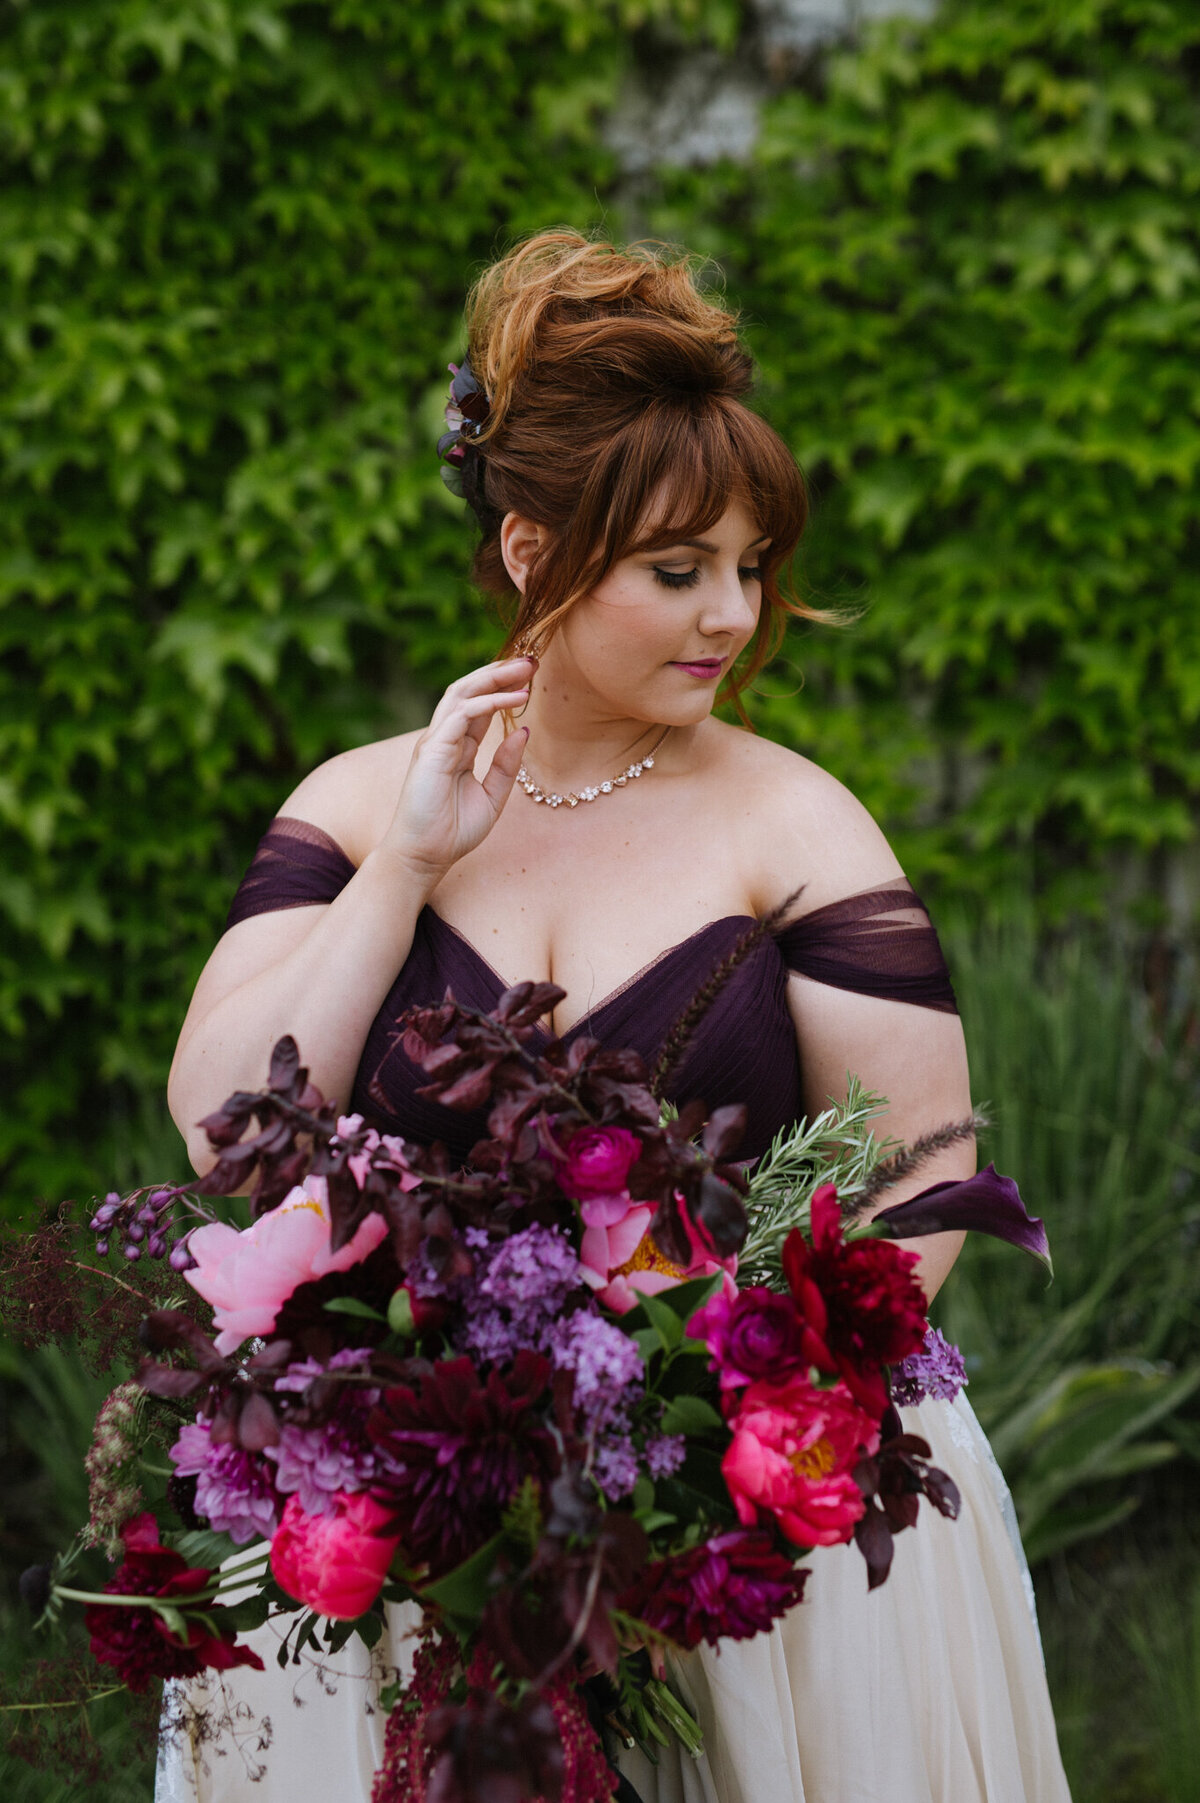 Stunning orange haired bride with maroon, purple and pink bouquet, captured by Christy D. Swanberg Photography, editorial elopement and wedding photographer in Calgary, Alberta, featured on the Bronte Bride Vendor Guide.